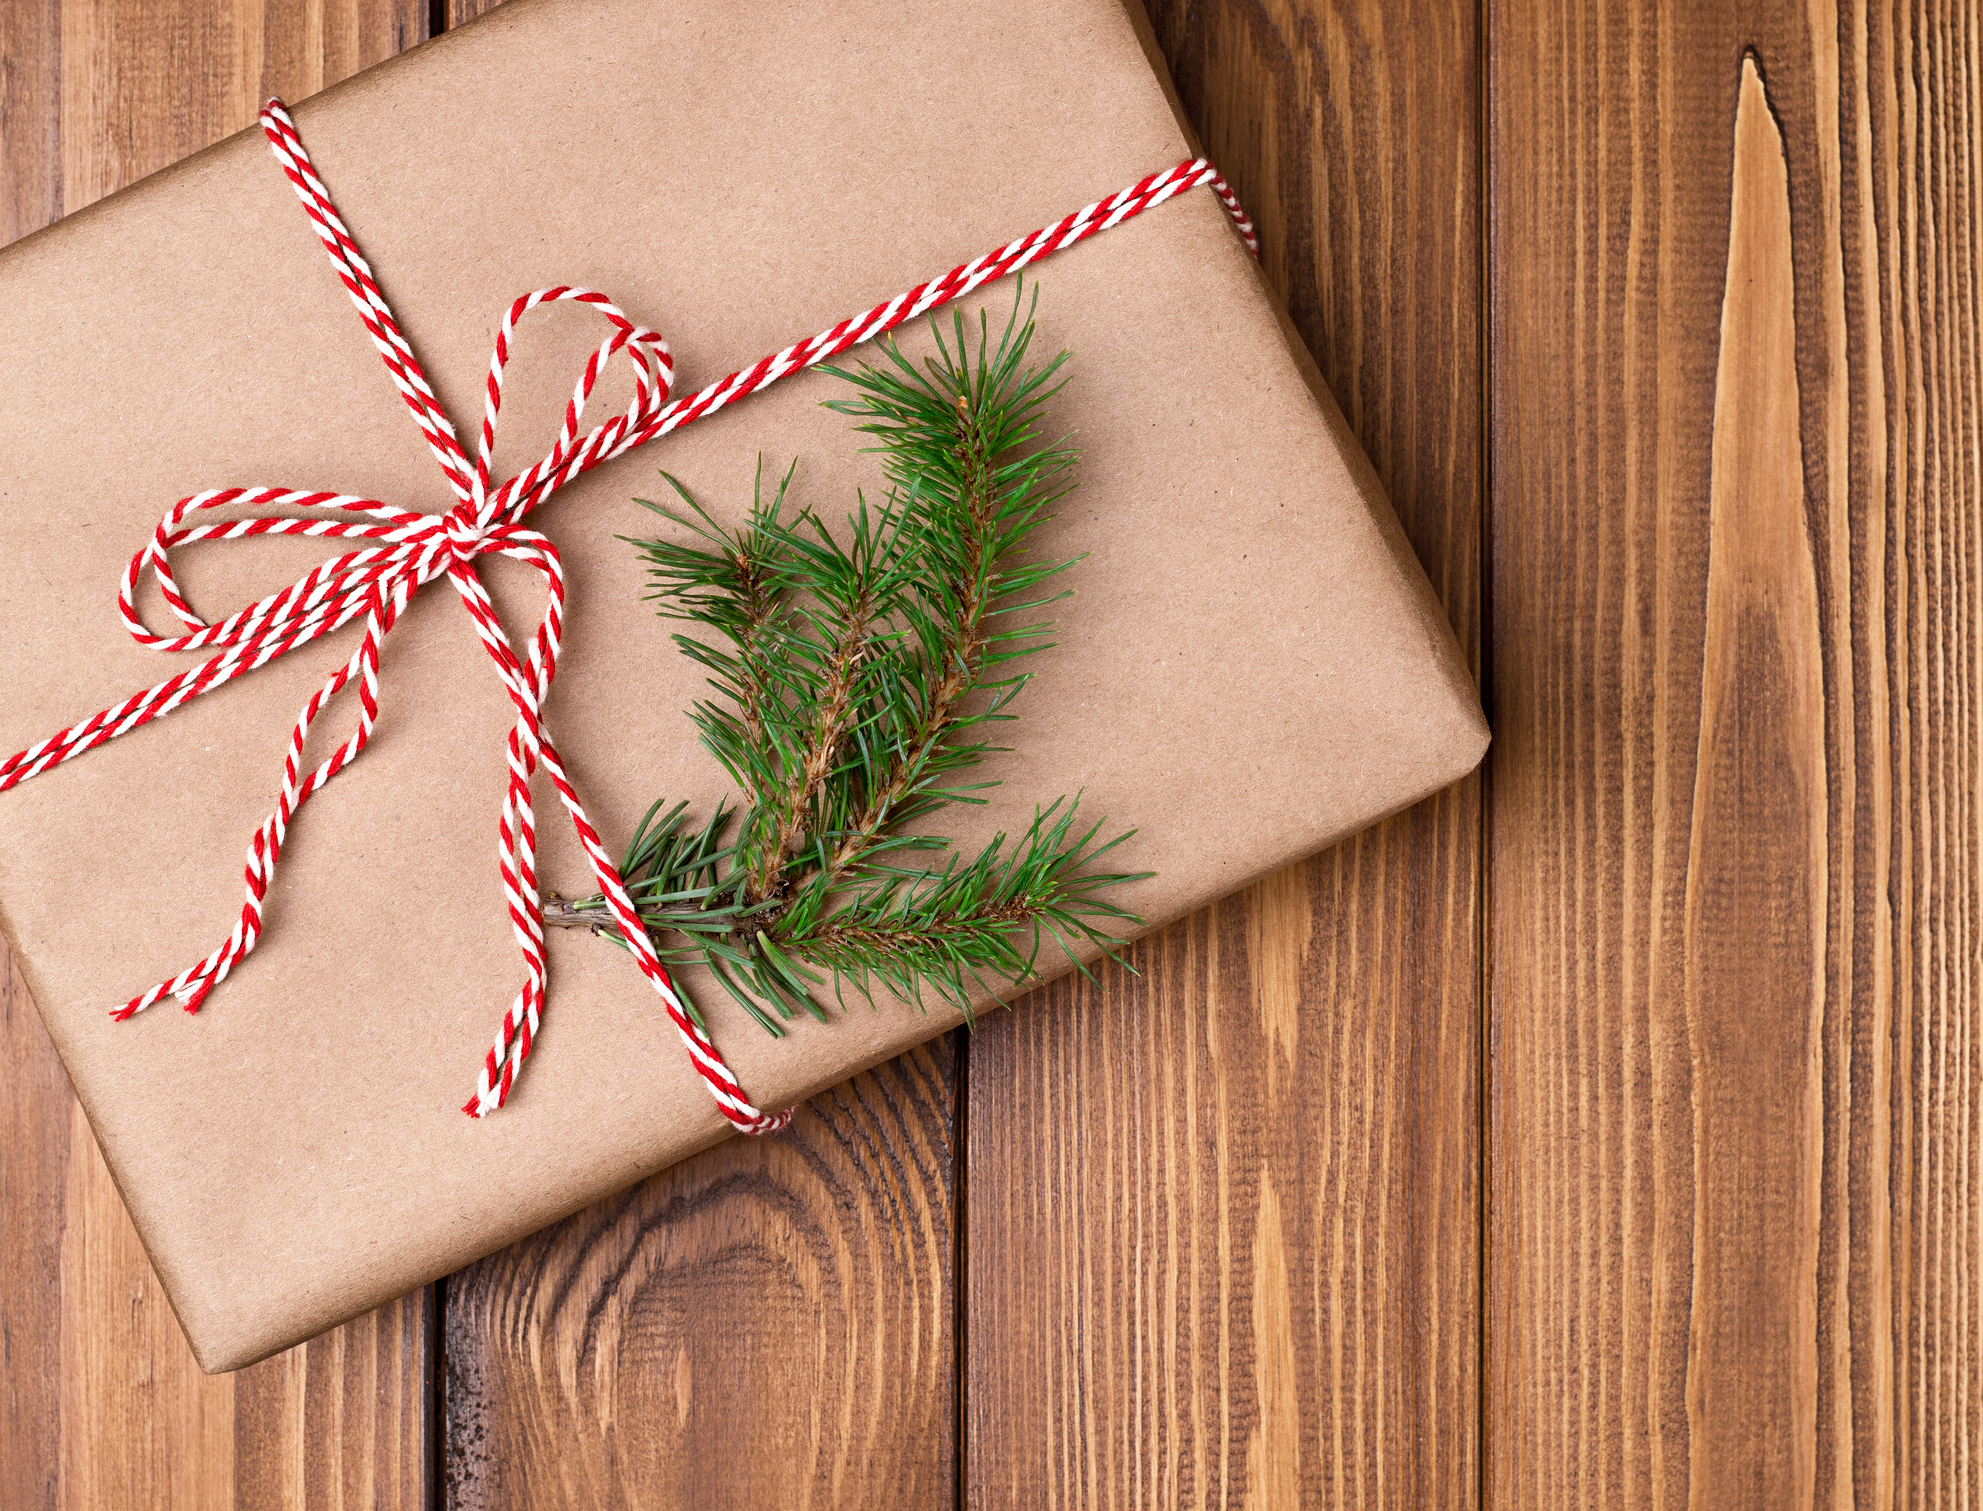 9 Low-Effort Yet Thoughtful Last Minute Christmas Gift Ideas